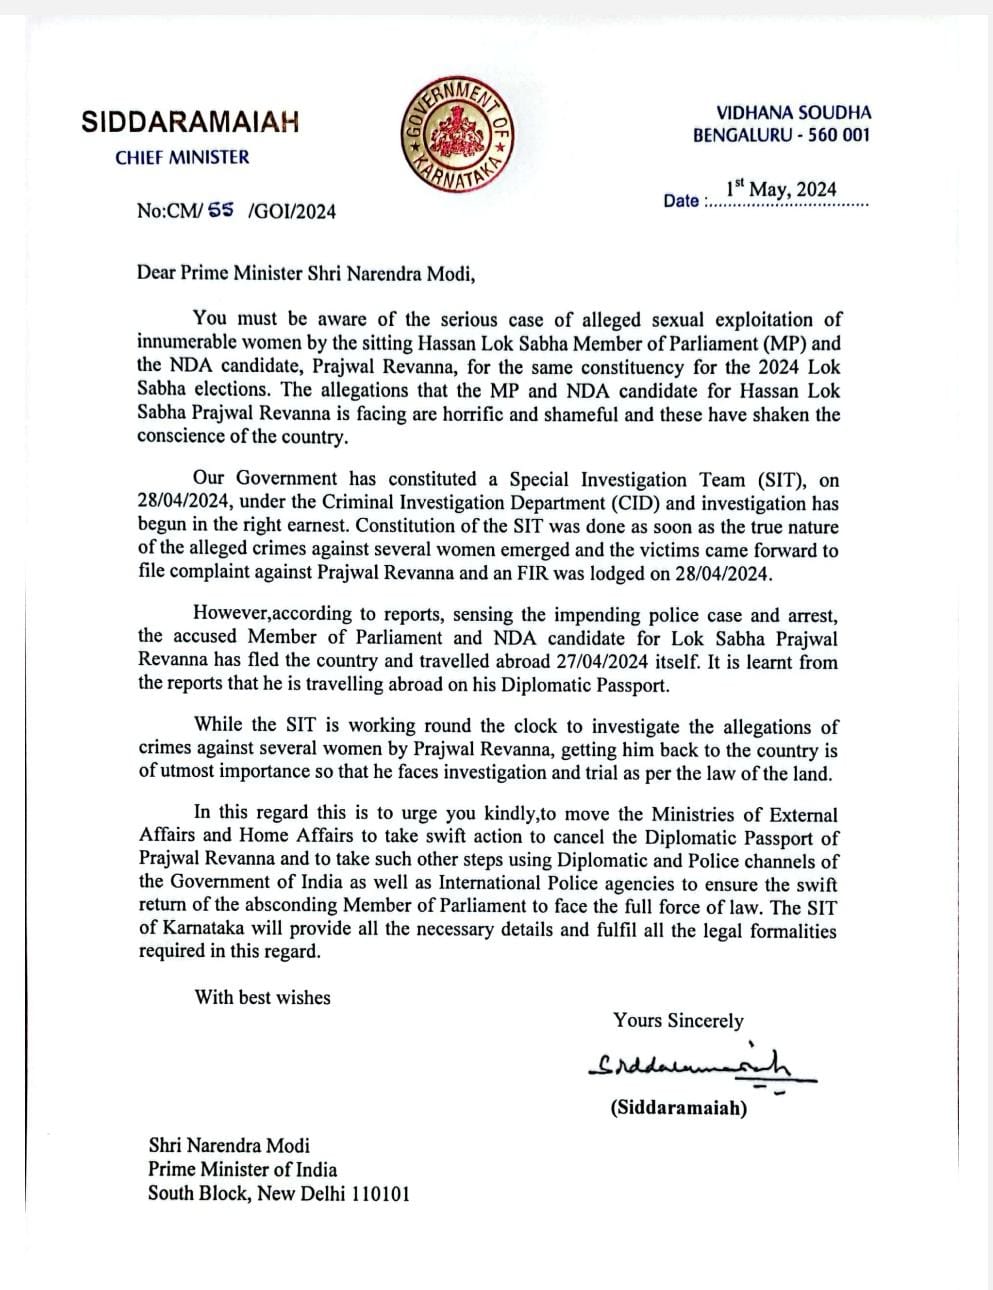 Karnataka CM Siddaramaiah writes to PM Modi requesting him to direct the Ministry of External Affairs and Ministry of Home Affairs to cancel the Diplomatic Passport issued to Hassan MP & JD(S) leader Prajwal Revanna and ensure his return to face the law